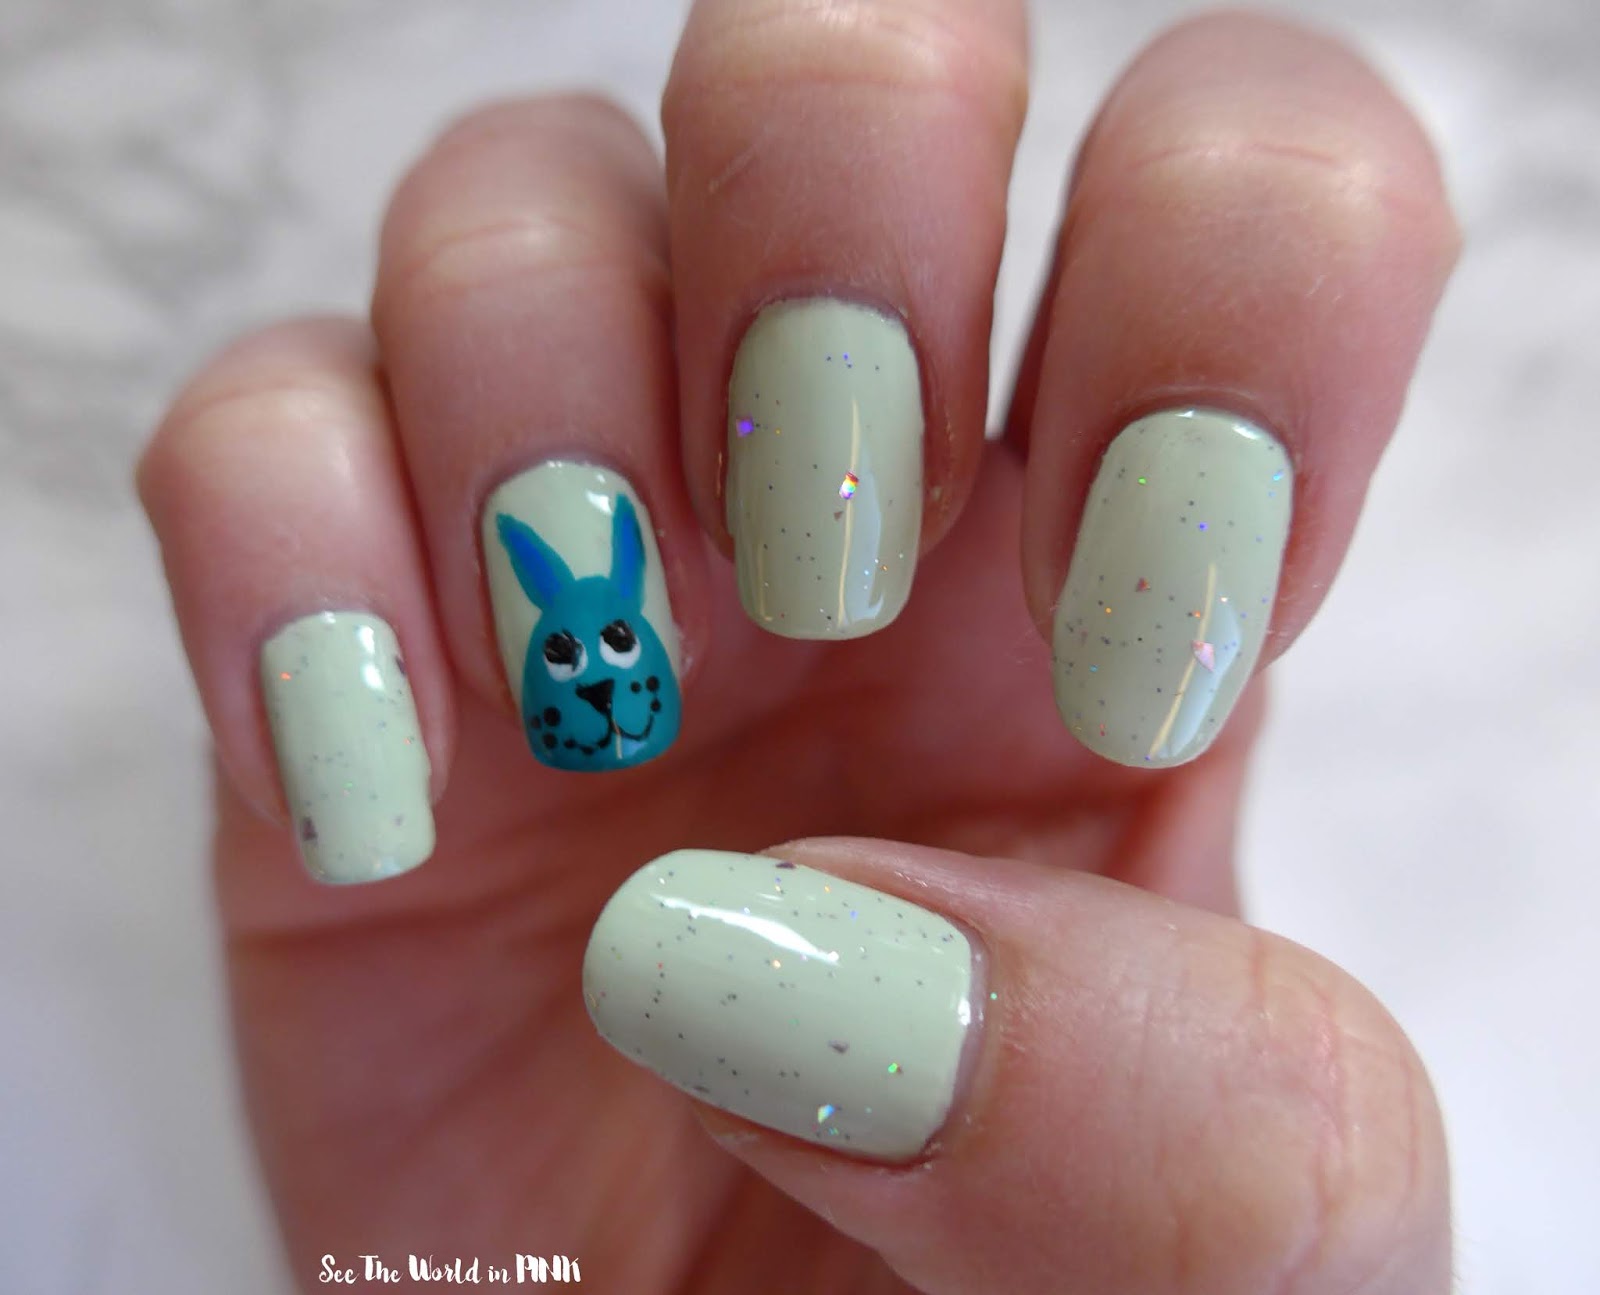 Manicure Monday - Easter Bunny Nails 